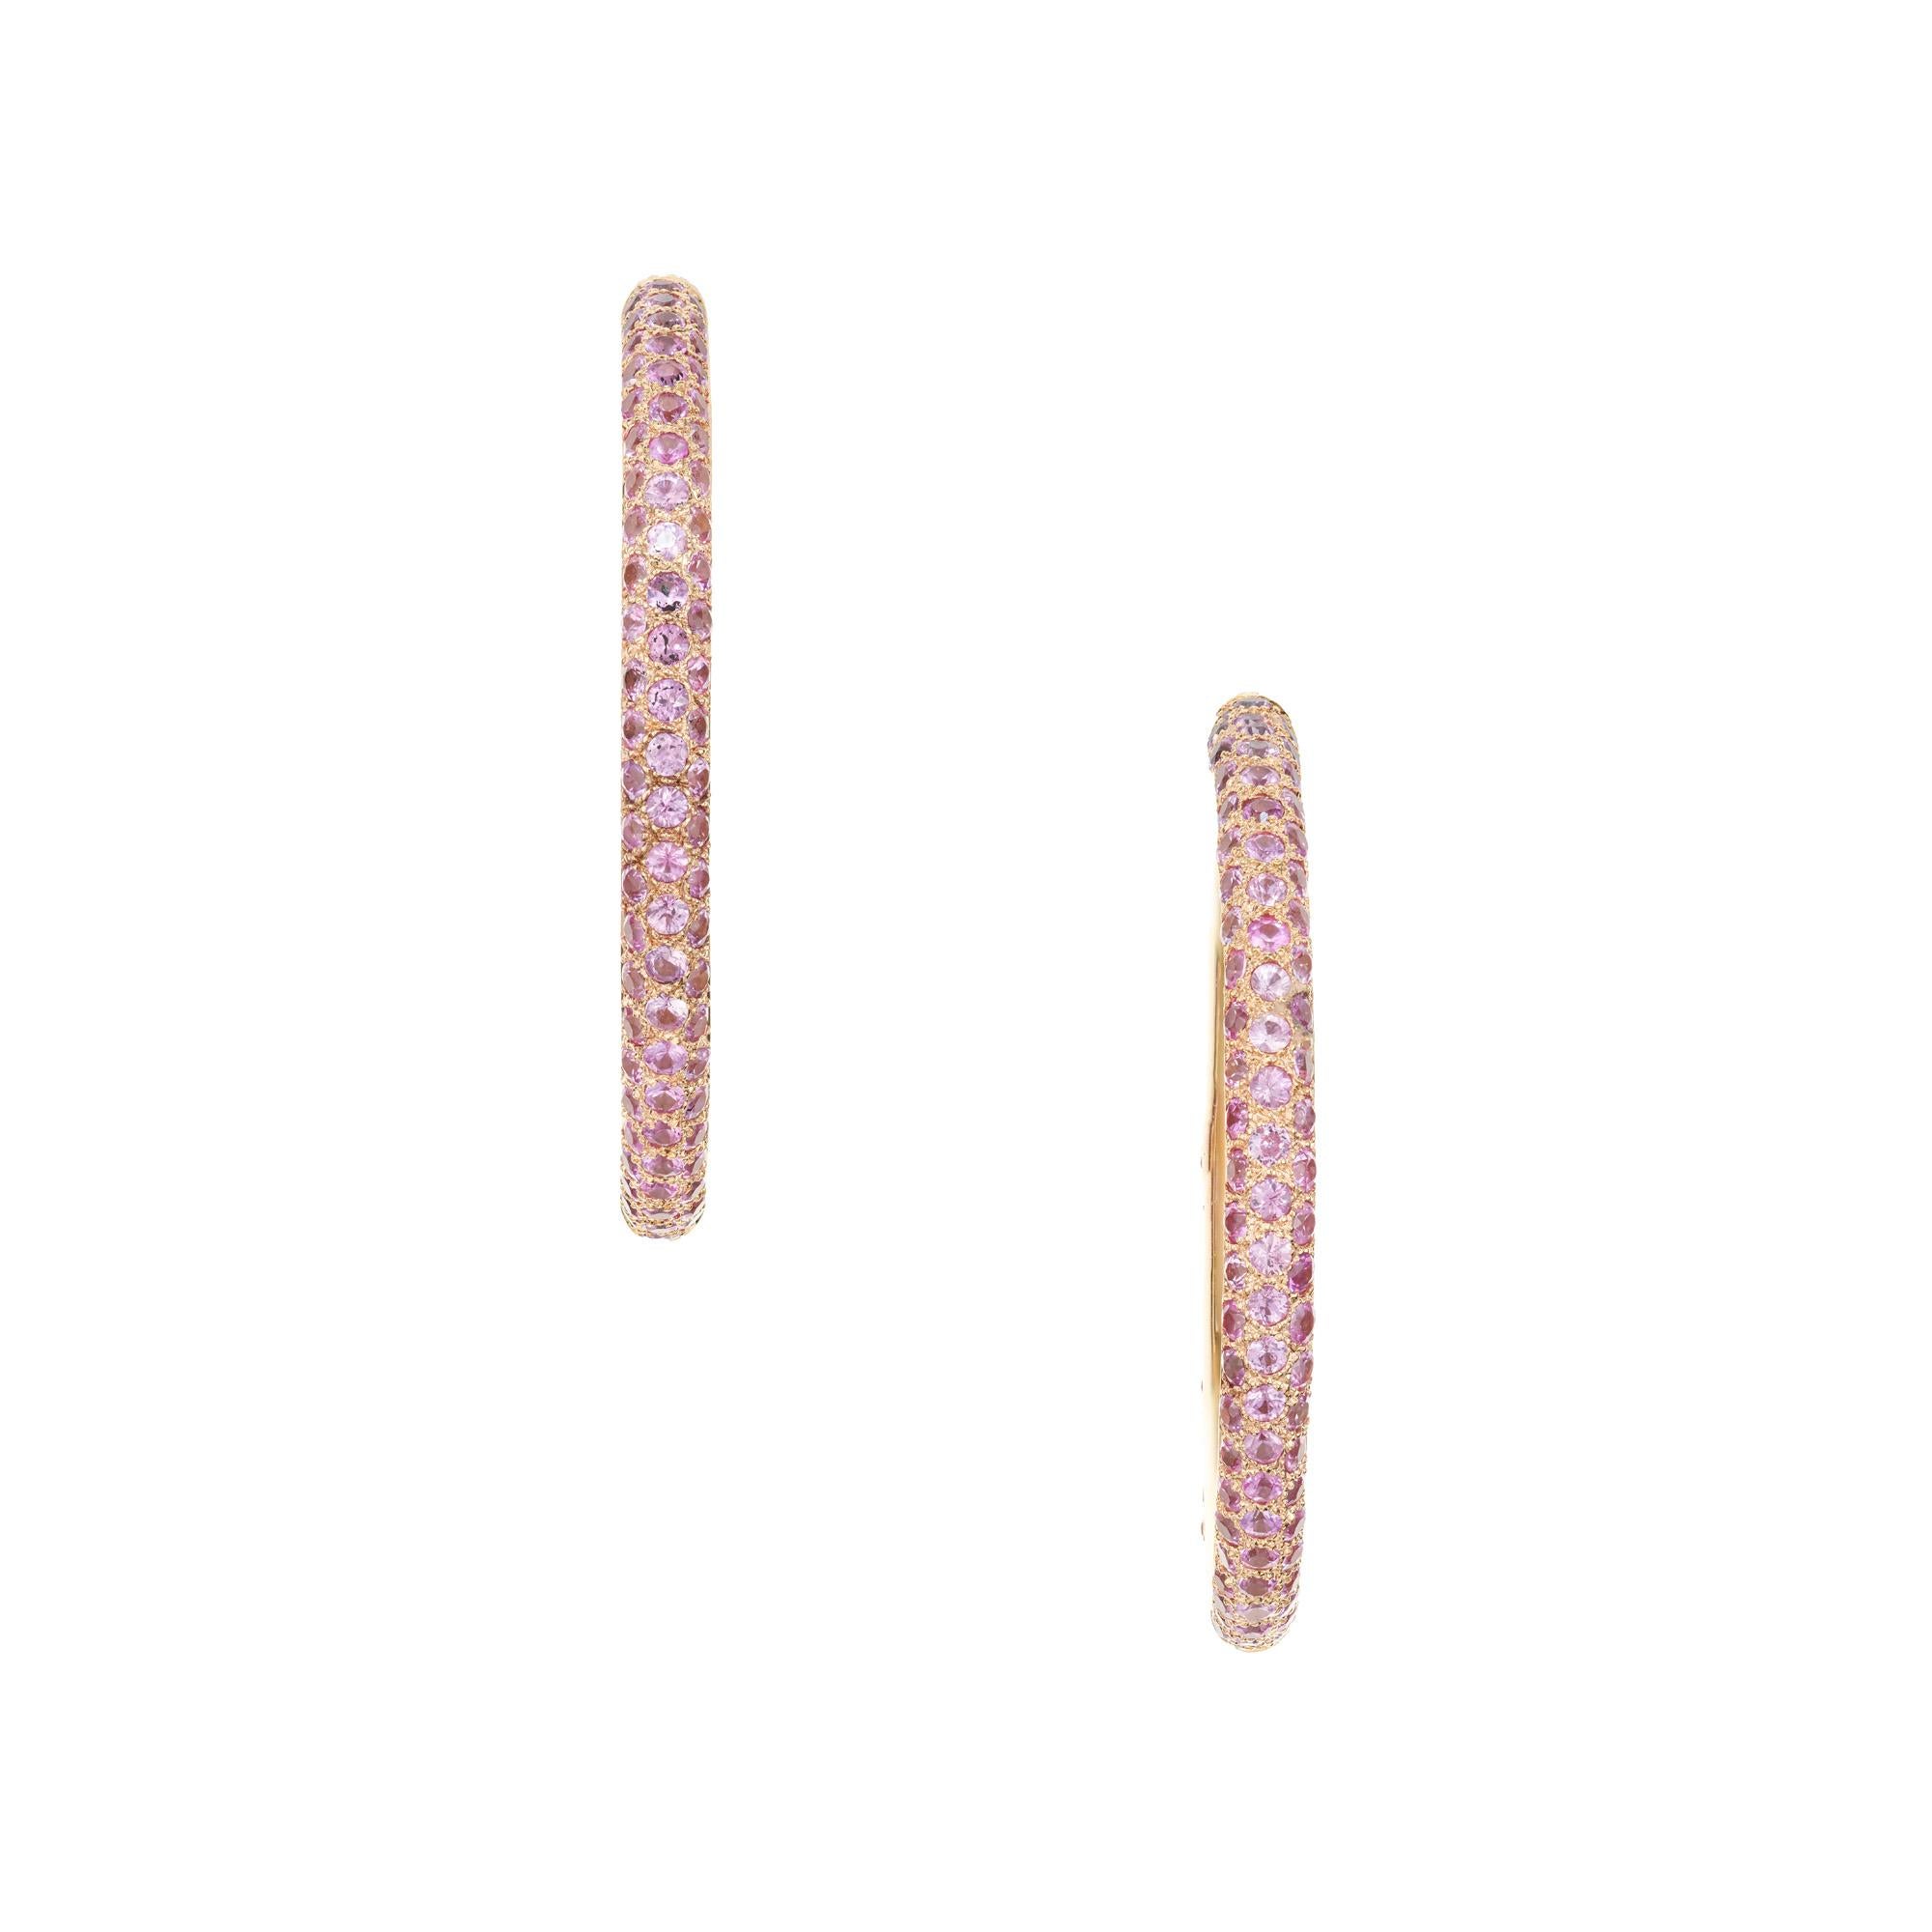 1990's Sapphire hoop earrings. These earrings feature 304 round pink sapphires totaling approximately 10.00cts. set in 18k yellow gold hoops. These magnificent earrings are 1.75 Inches across, 4mm wide.  

304 pink sapphires, SI approx. 10.00cts
18k